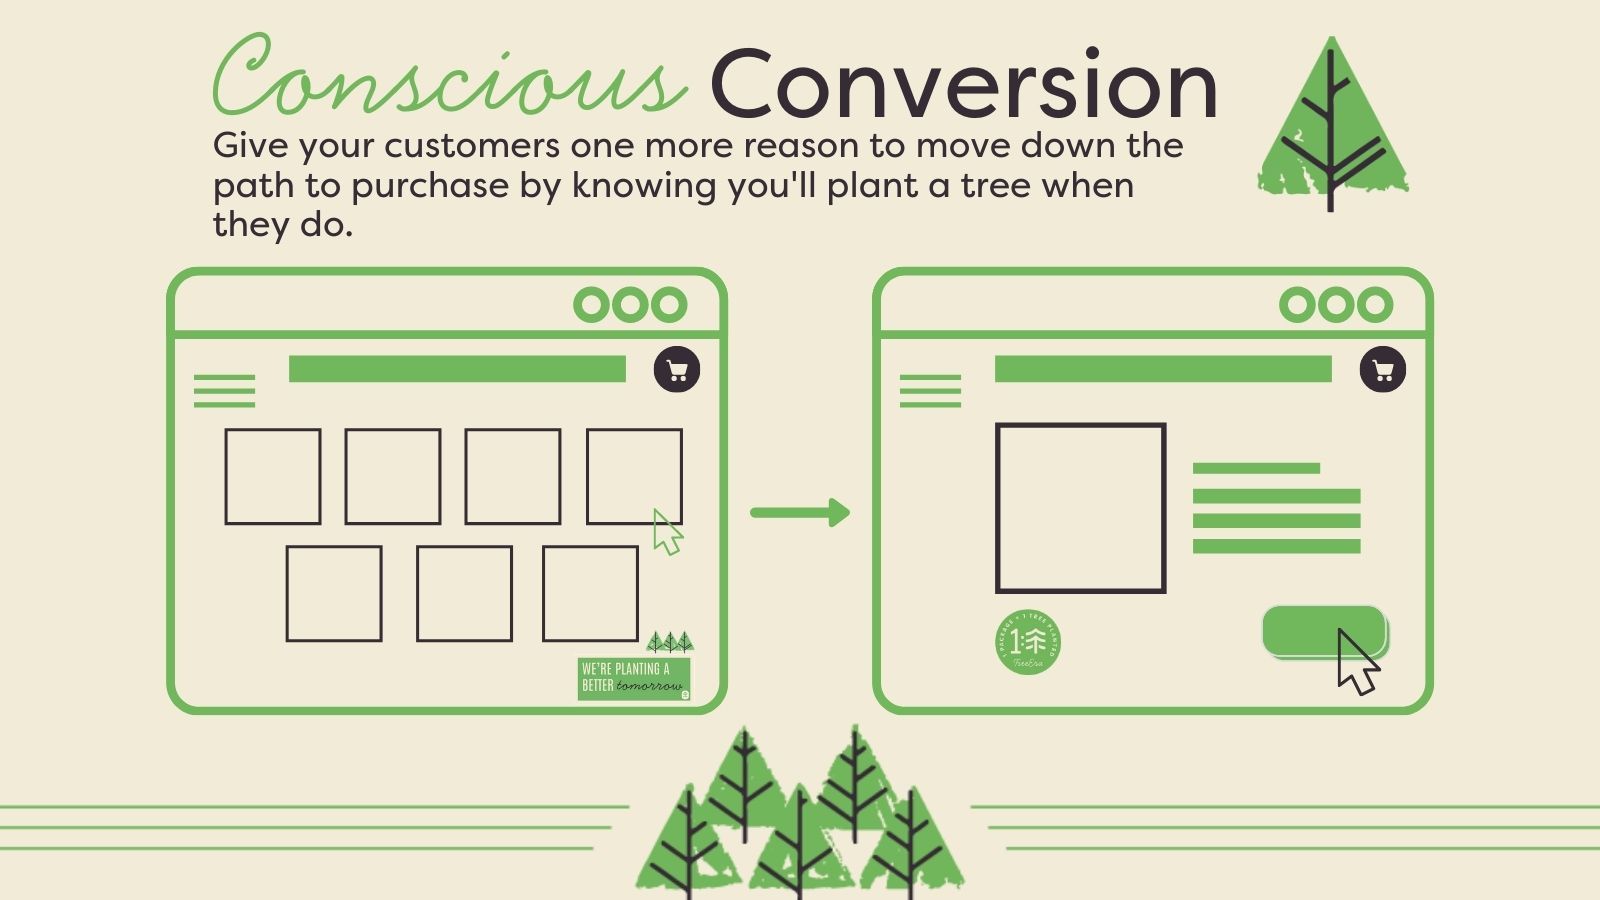 Make every conversion an eco-conscious one.